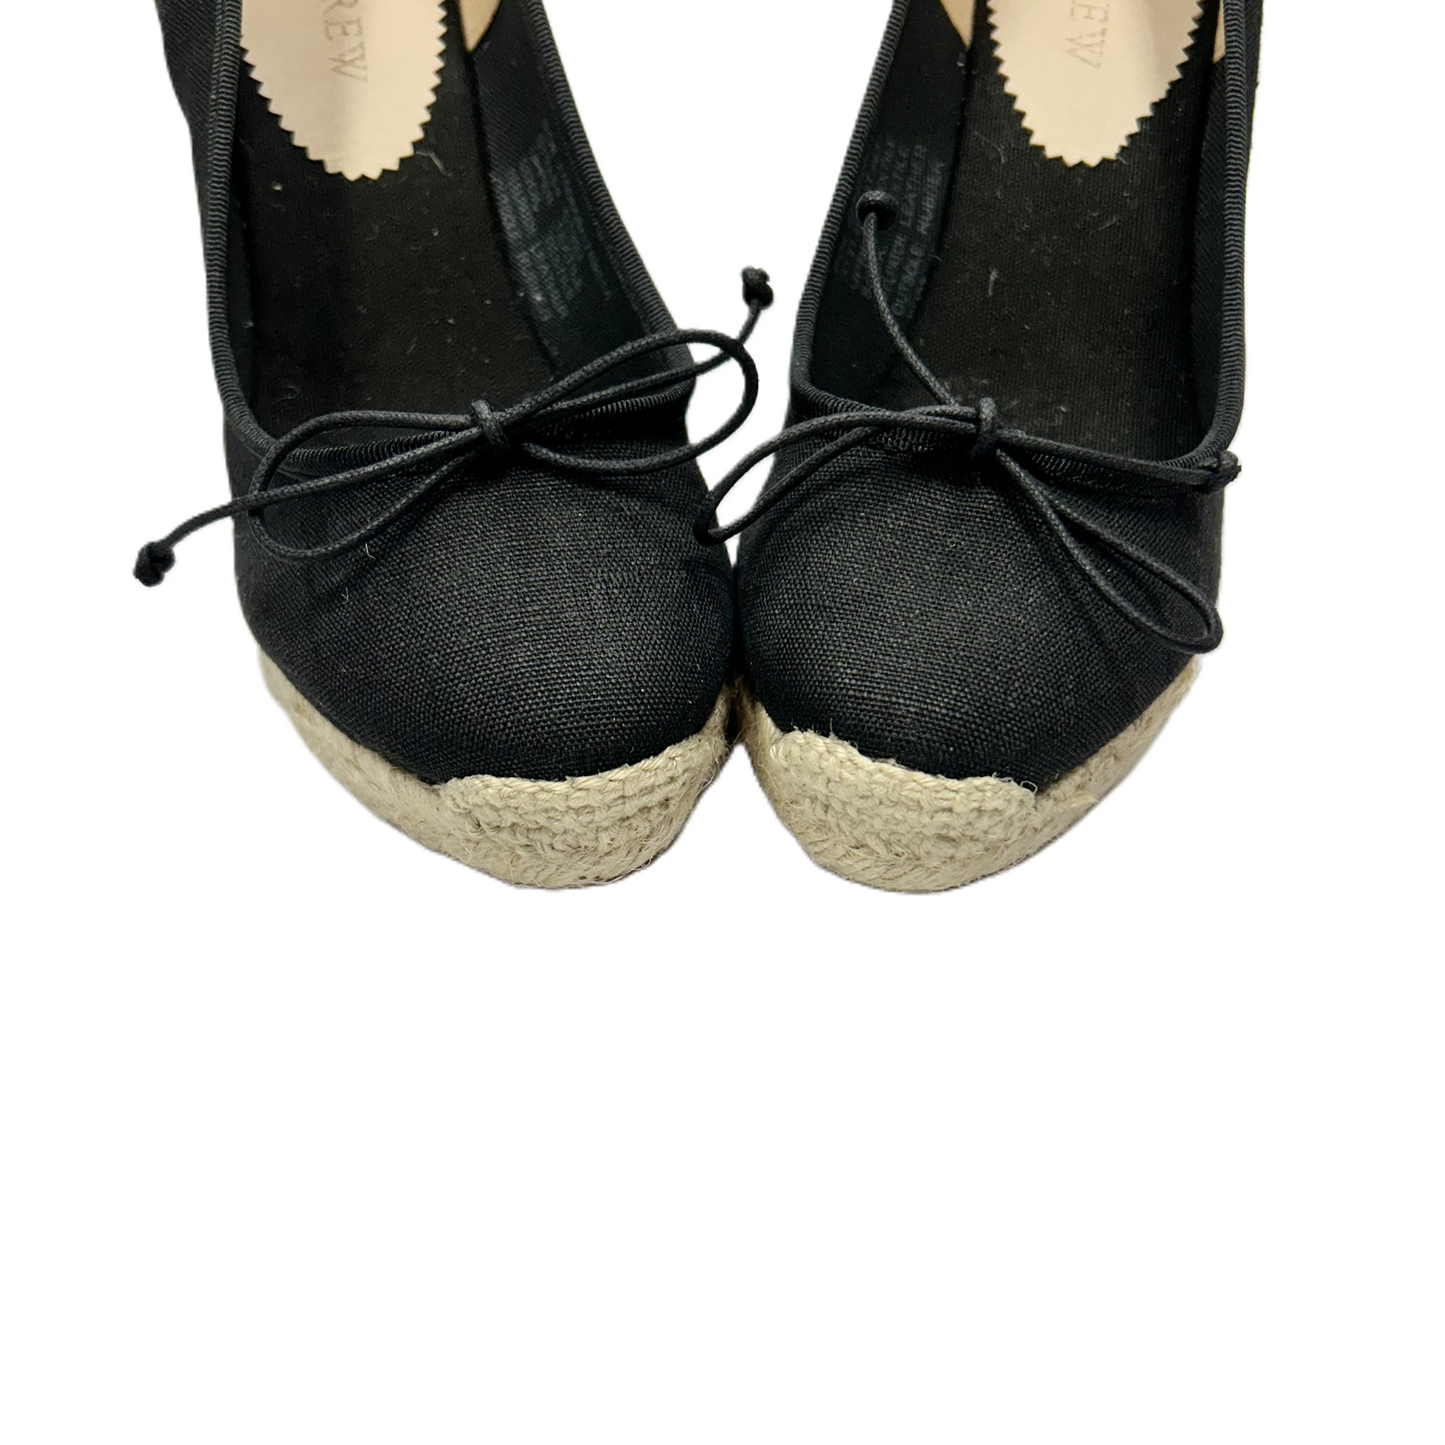 Sandals Heels Wedge By J. Crew  Size: 6.5